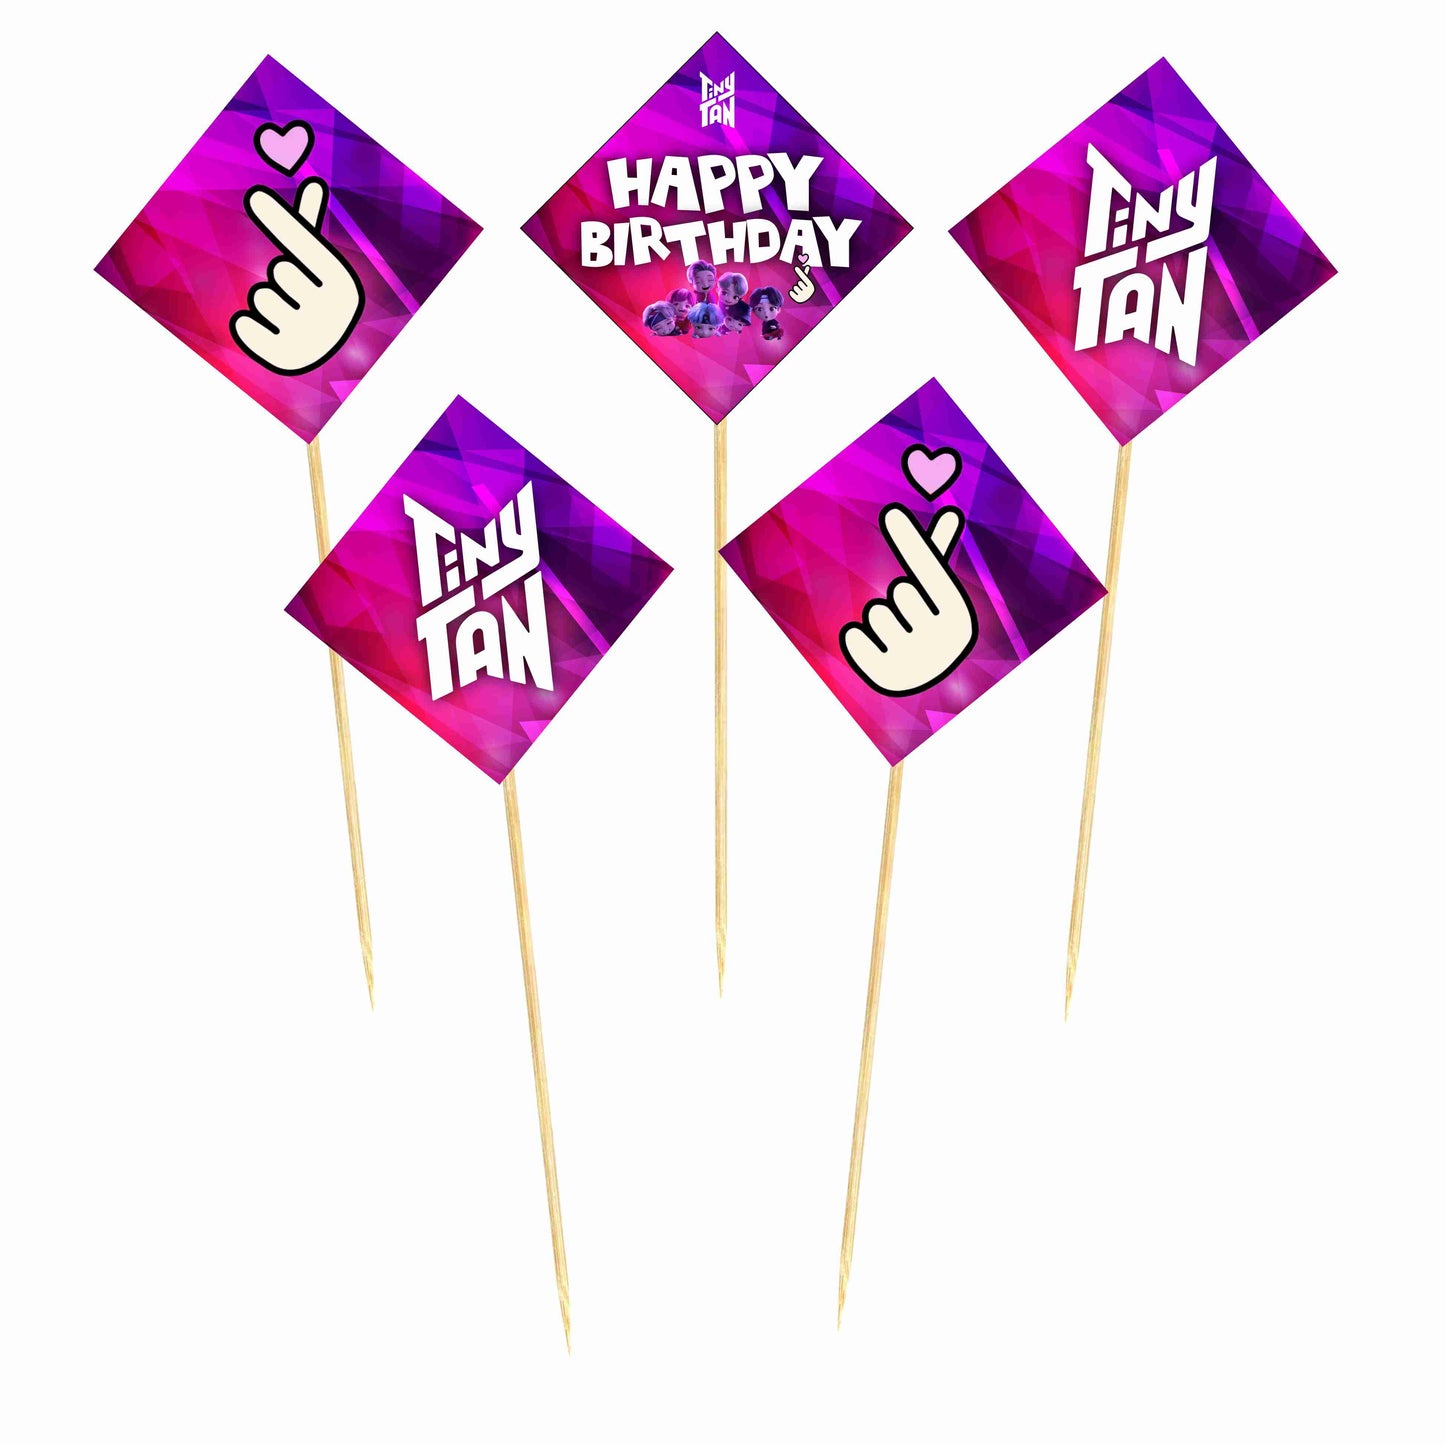 Tiny Tans Theme Cake Topper Pack of 10 Nos for Birthday Cake Decoration Theme Party Item For Boys Girls Adults Birthday Theme Decor